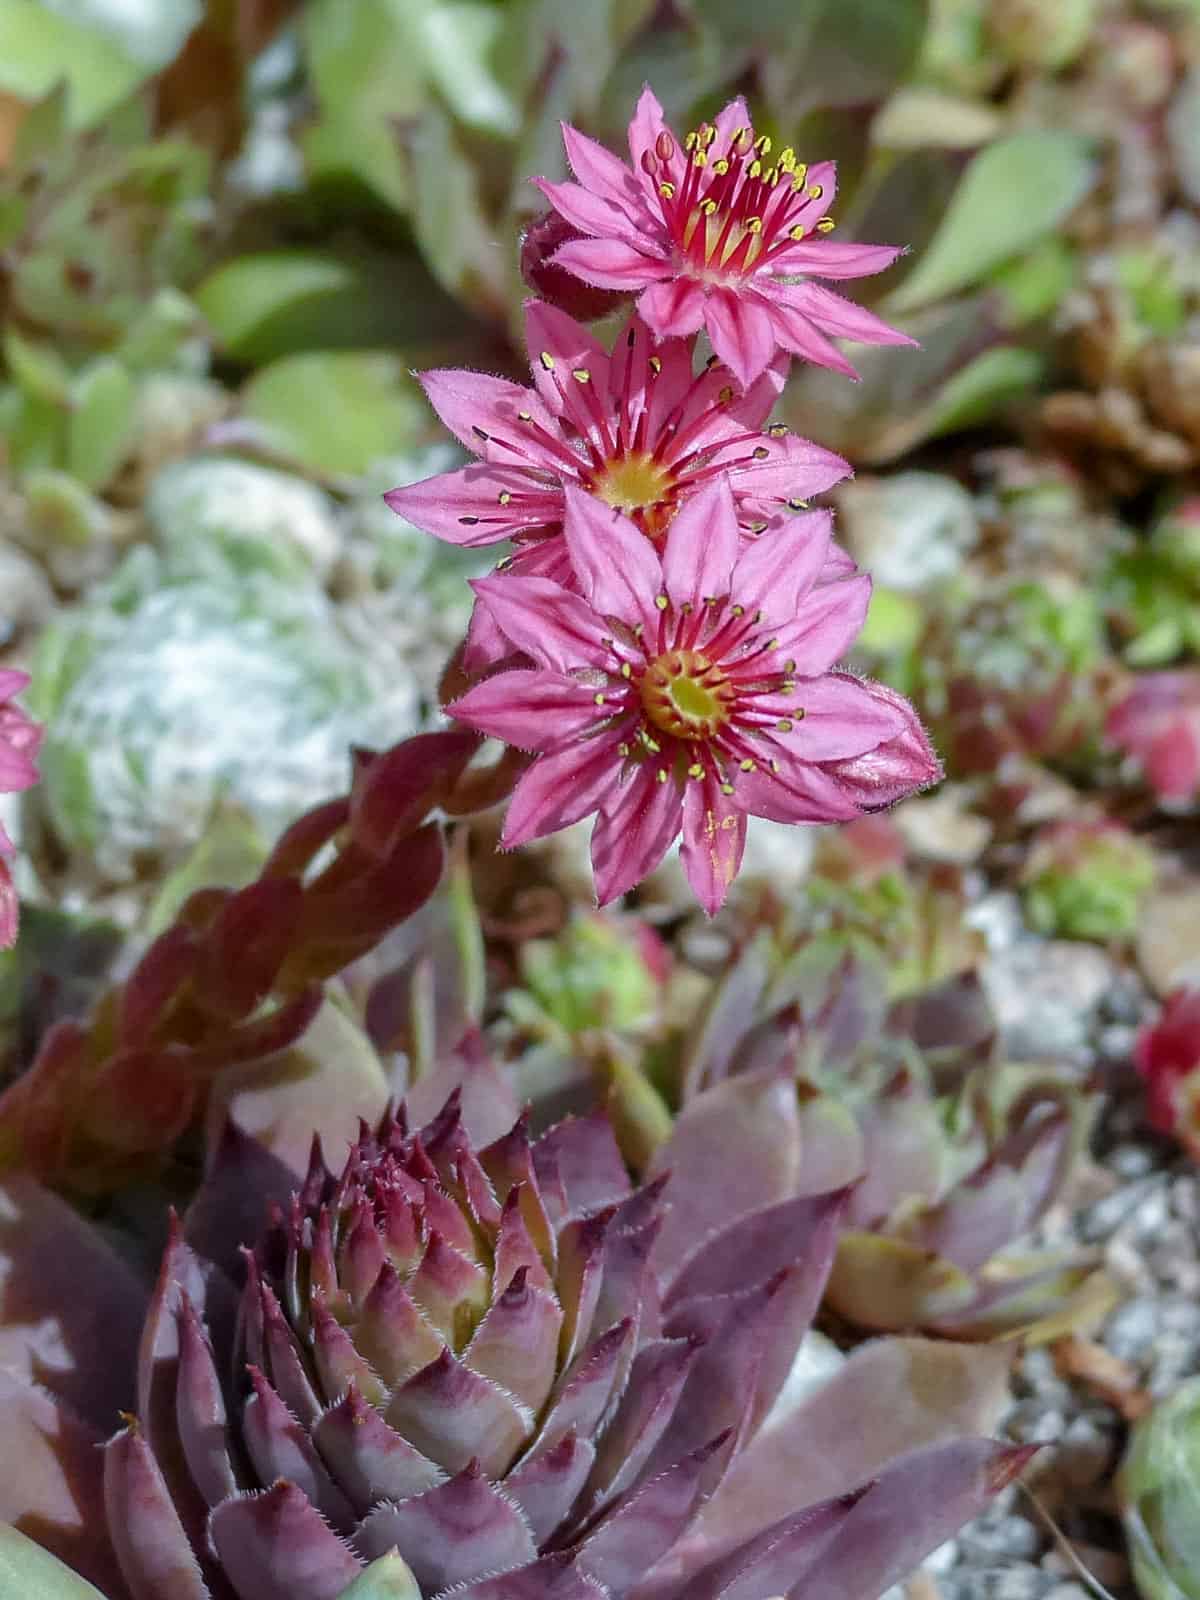 Muted pink colored petals of a Hens and Chicks succulent